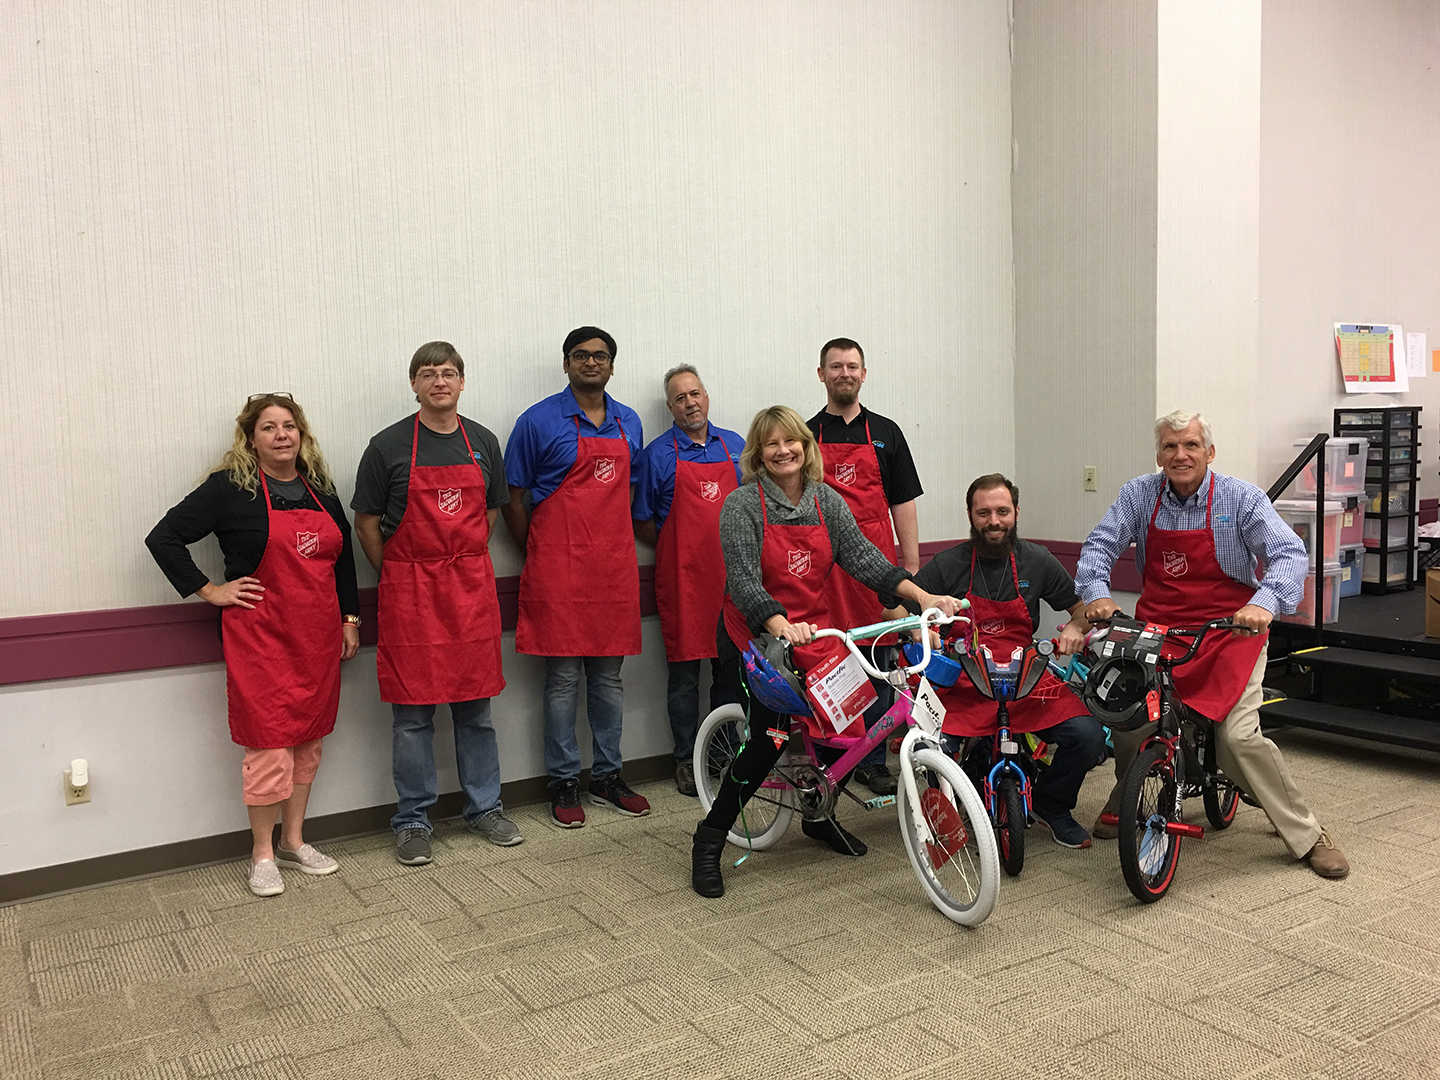 VIBE team during the 2018 Salvation Army Toy Sorting with team members standing and on bicycles